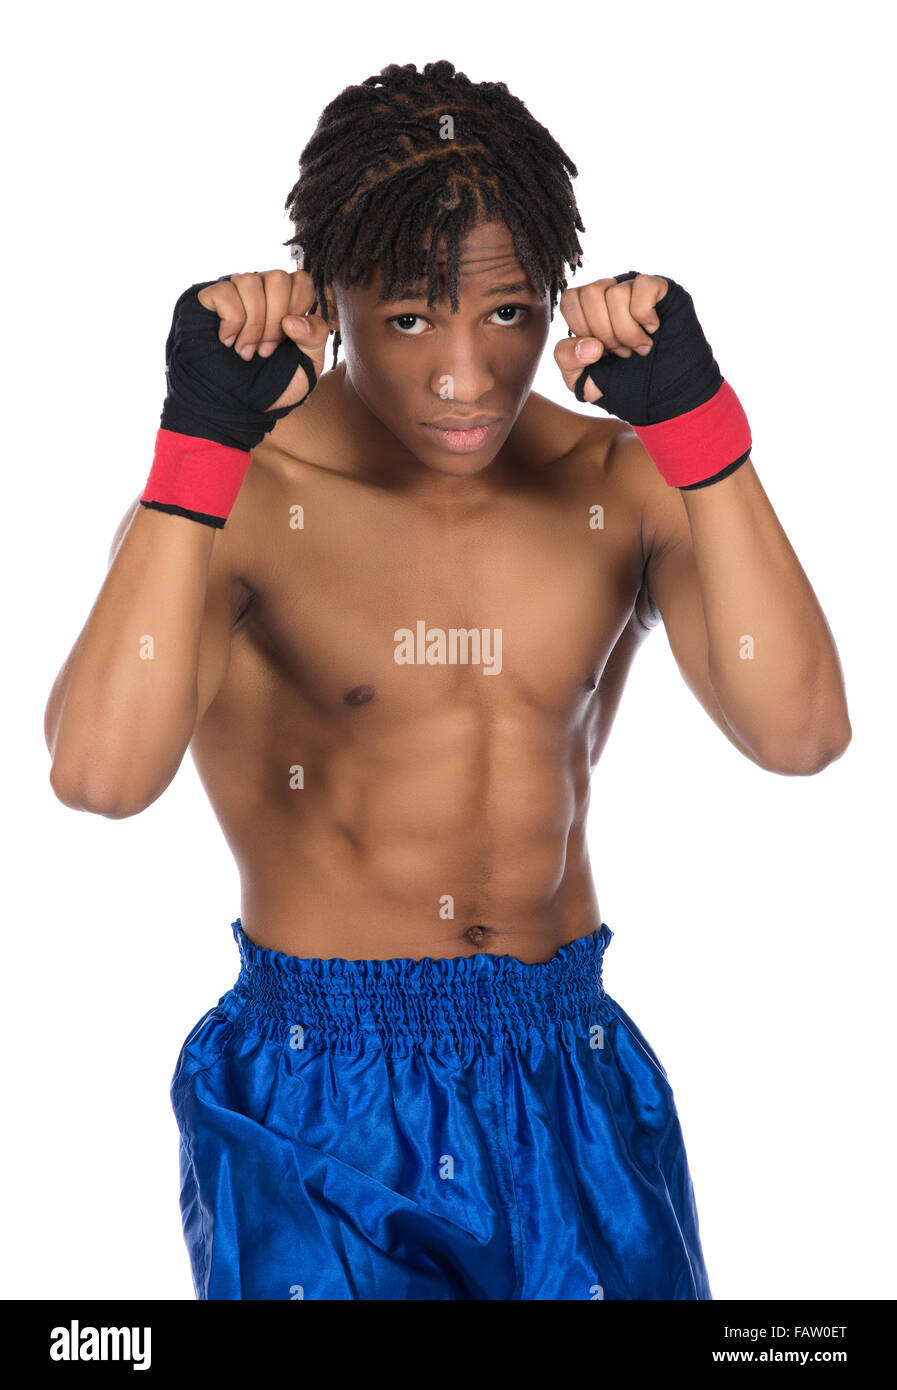 Young muscular athletic male boxer wearing blue boxing shorts and red boxing  gloves Stock Photo - Alamy